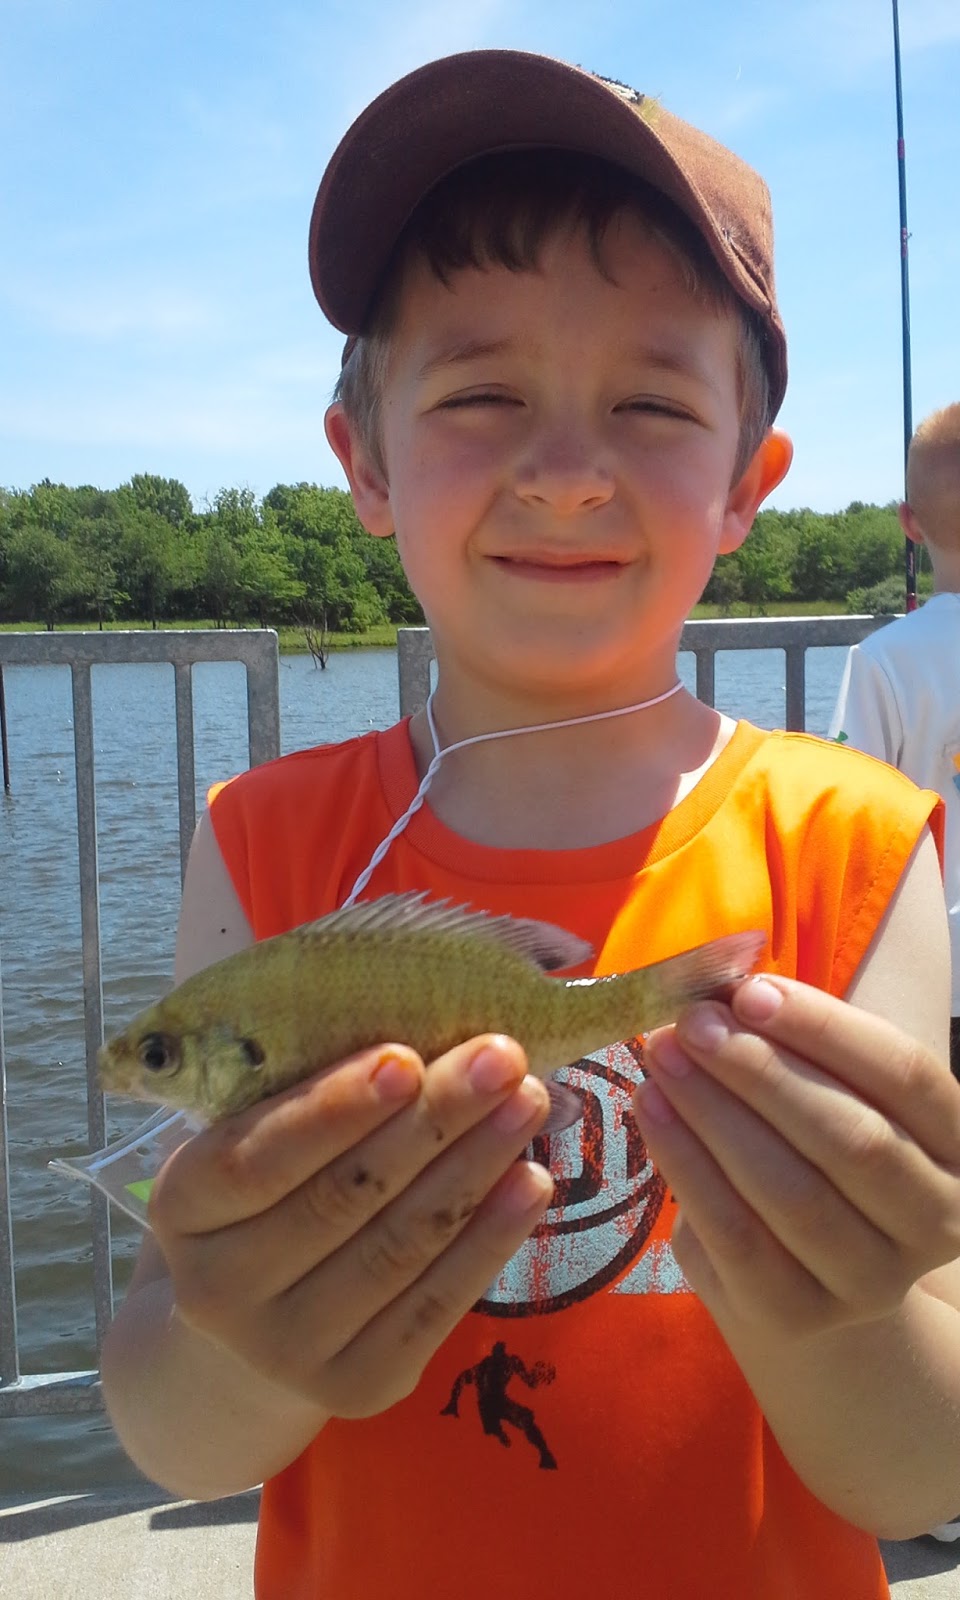 The Show Me Fly Guy: Taking kids fishing has little to do with actually  fishing.